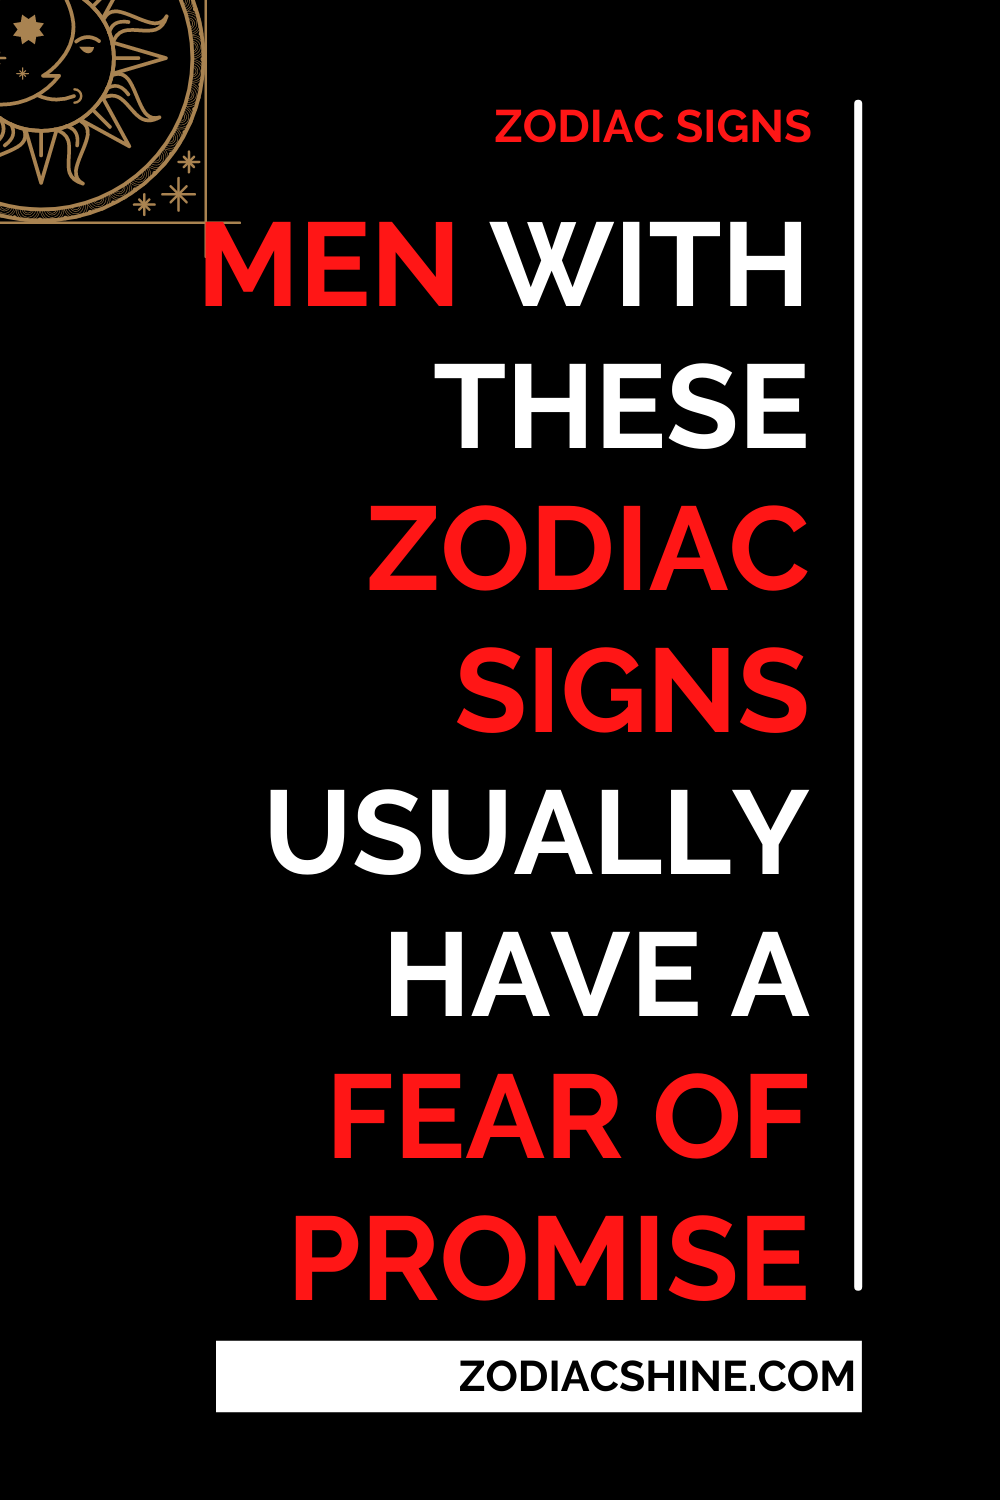 Men With These Zodiac Signs Usually Have A Fear Of Promise